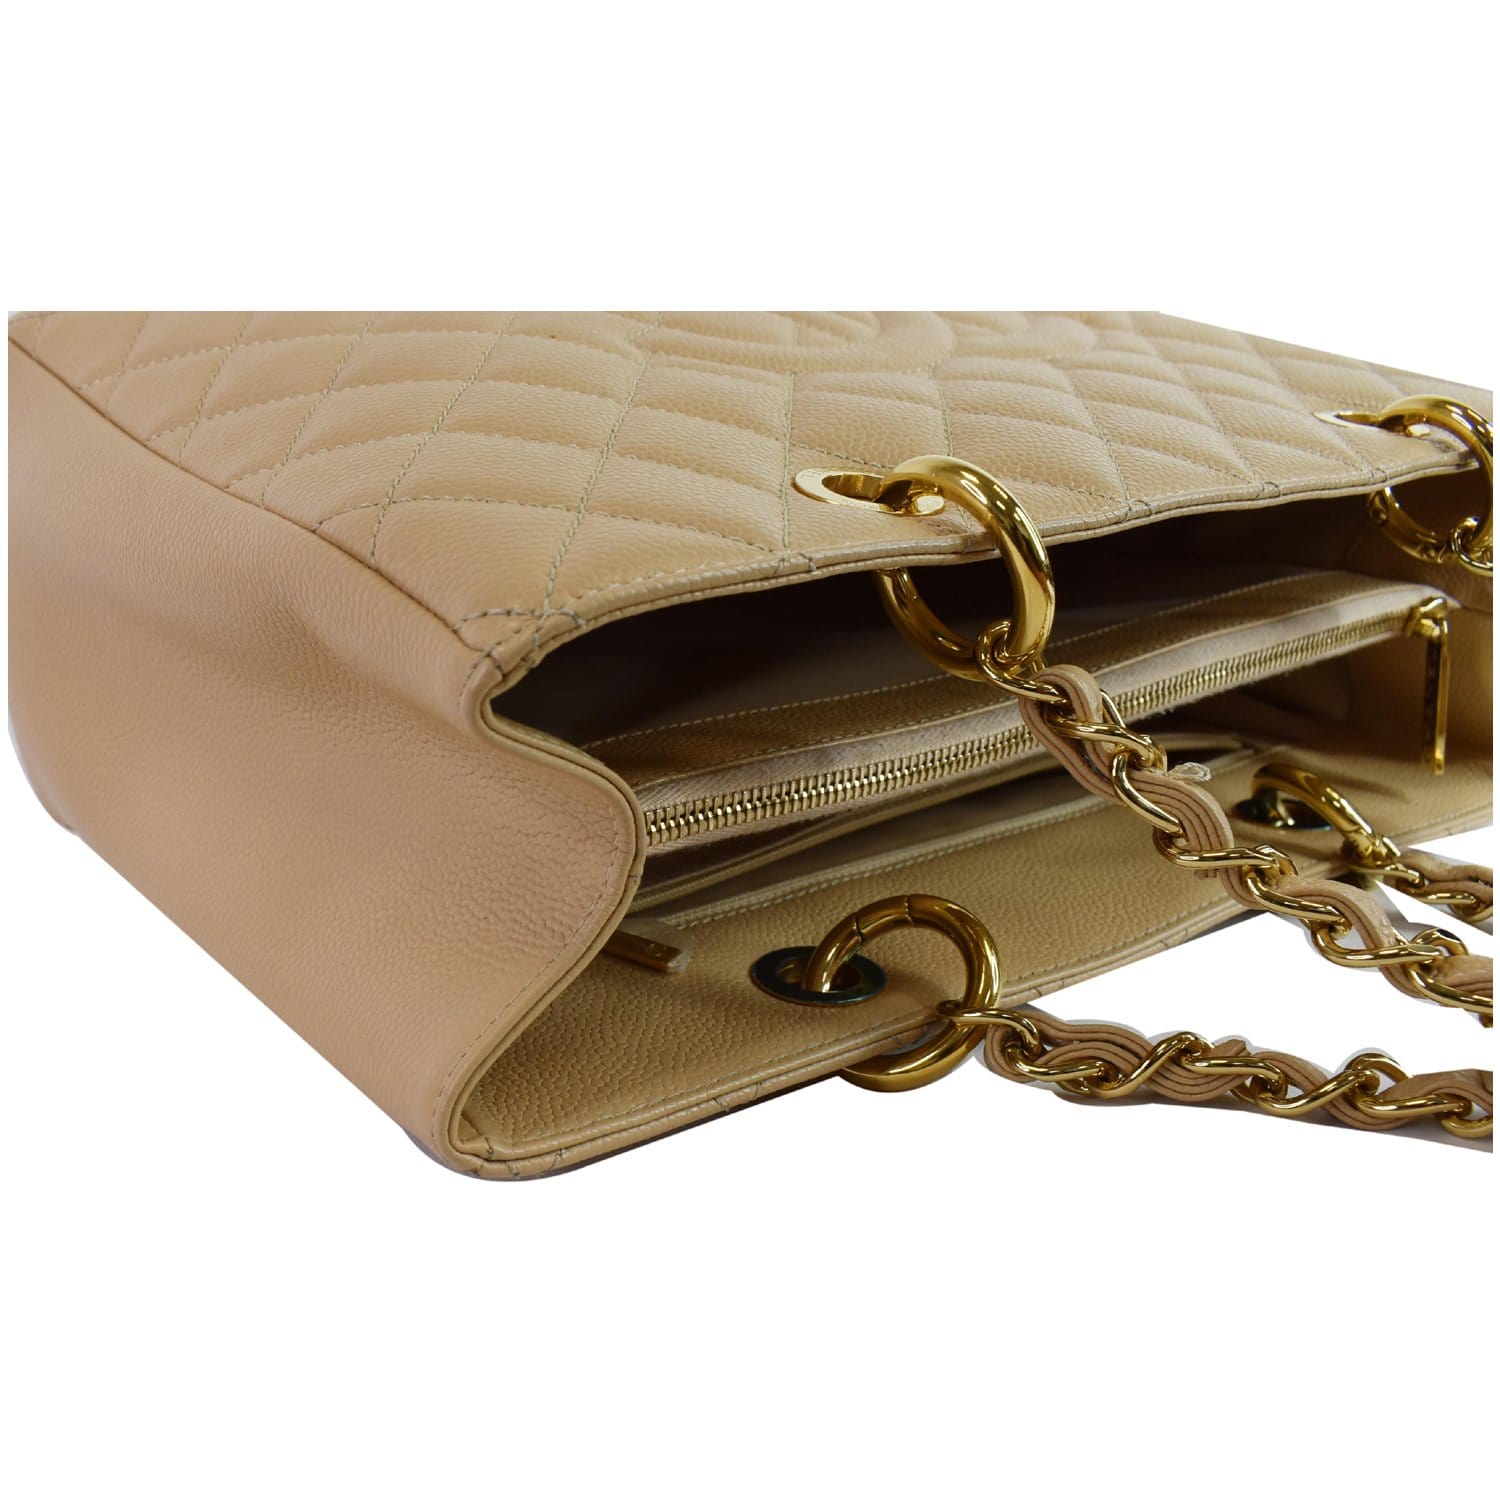 CHANEL Grand Shopping GST Caviar Leather Tote Bag Beige